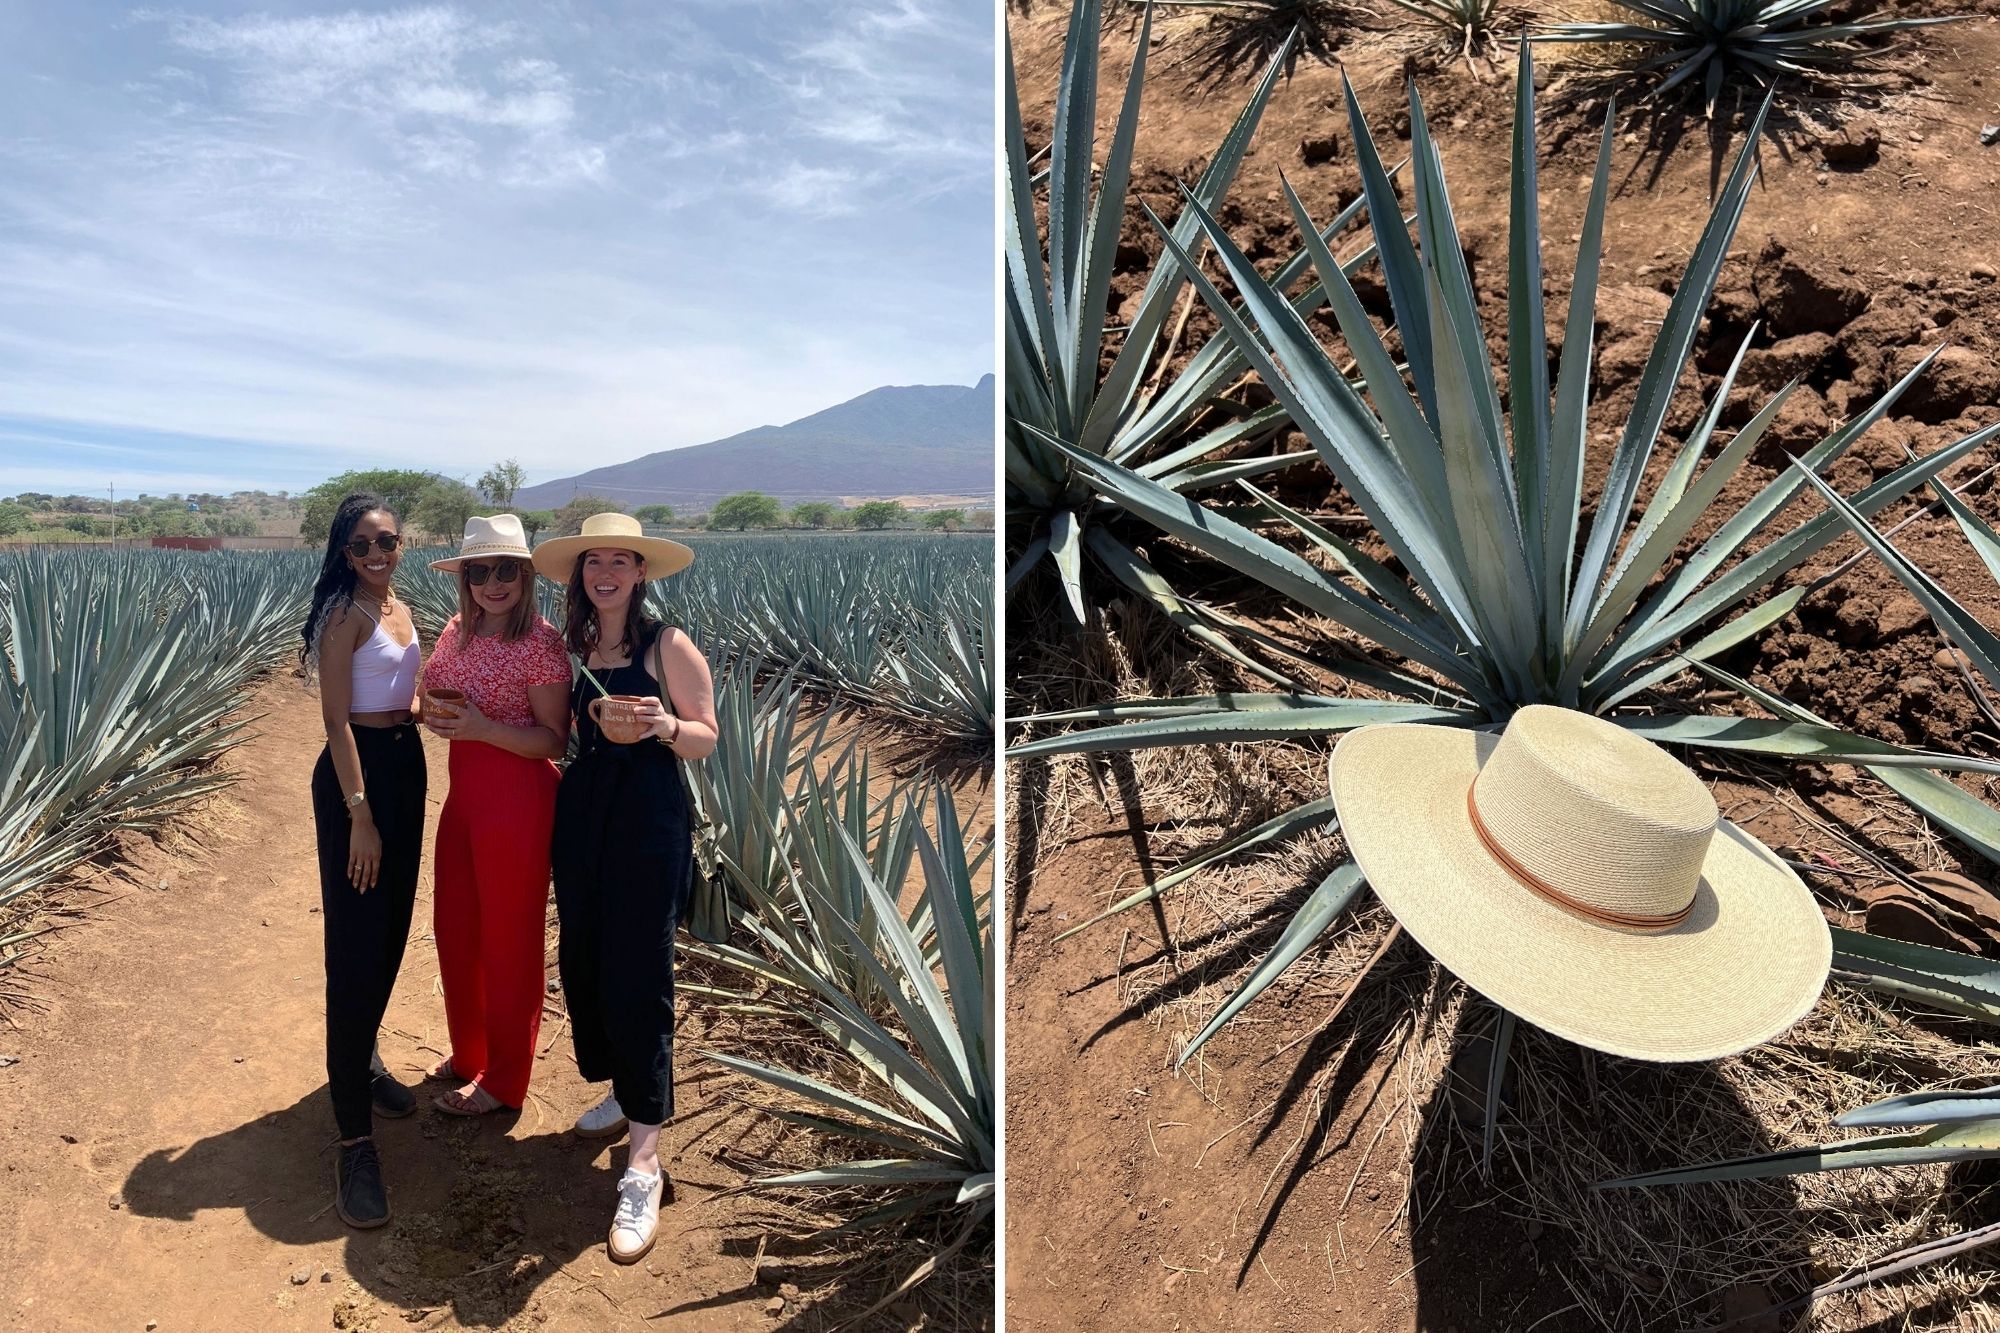 Three women in an agave field, and a hat in an agave plant